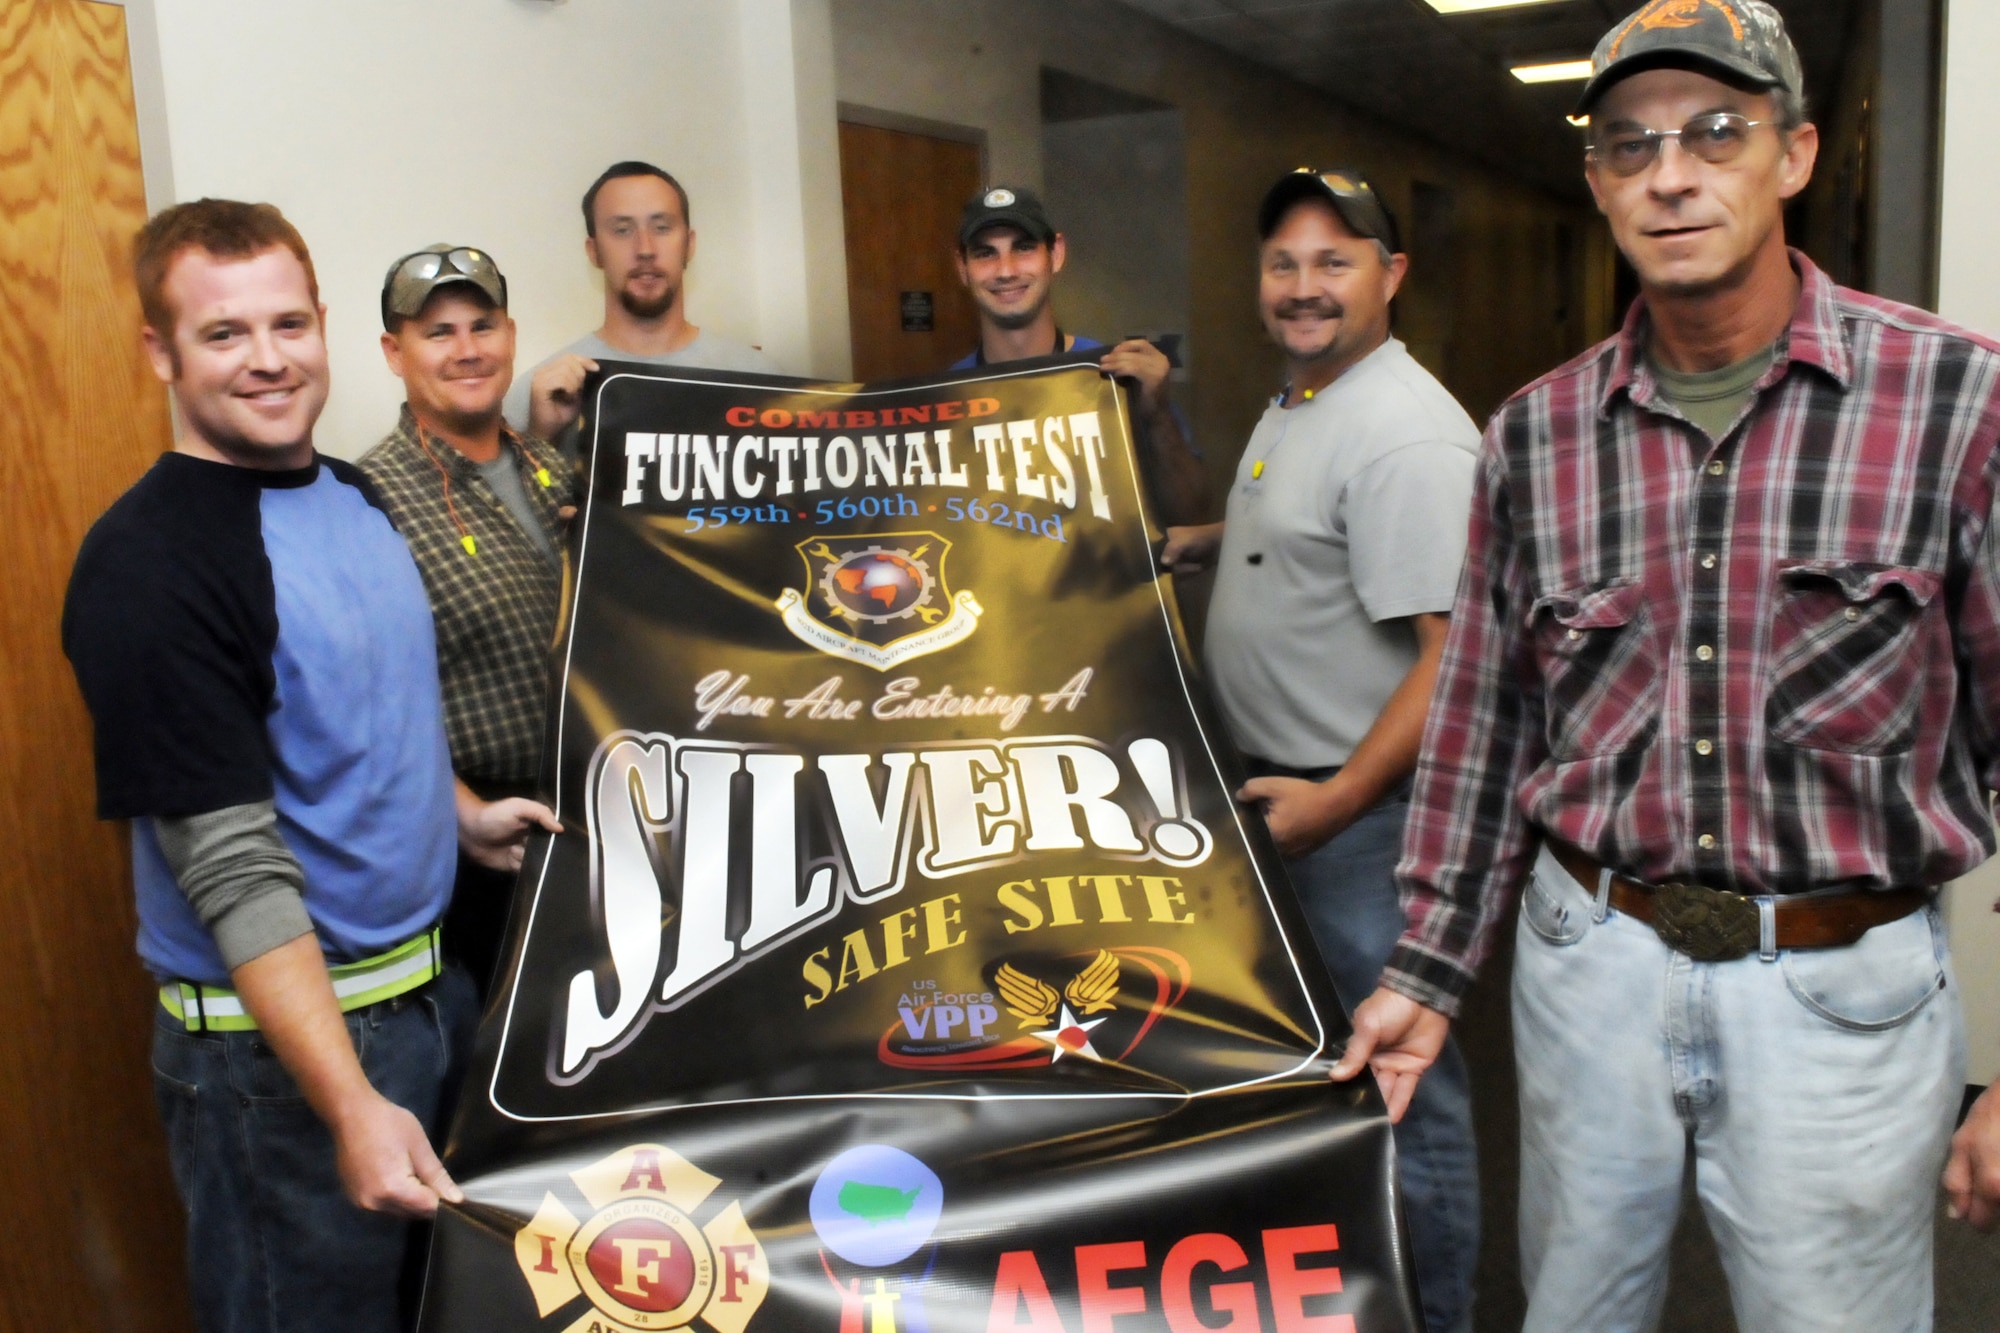 Representatives from the 559th (C-5), 560th (C-130) and the 562nd (C-17) display the VPP Combined Functional Test  banner denoting their status as a silver safe site. Pictured L-R are Keith Capra, Dean Huber, Wesley Kersey, Tony Day, Scott Ball and Craig Coates. U. S. Air Force photo by Sue Sapp